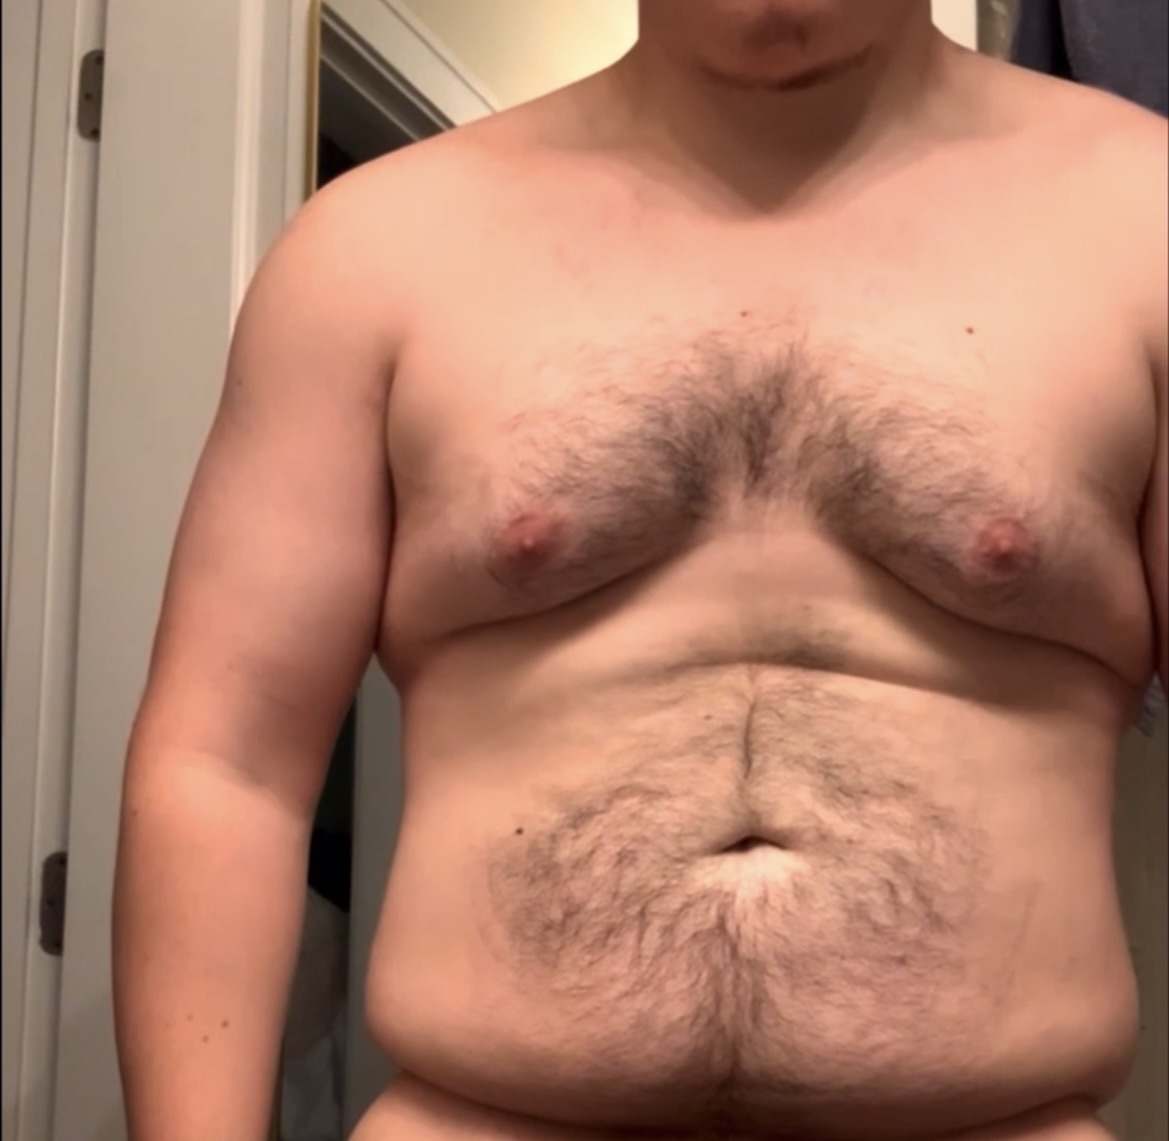 vavavoommmsblog-deactivated2023:nothing better than a muscle chub with tits and a huuuuge ass 